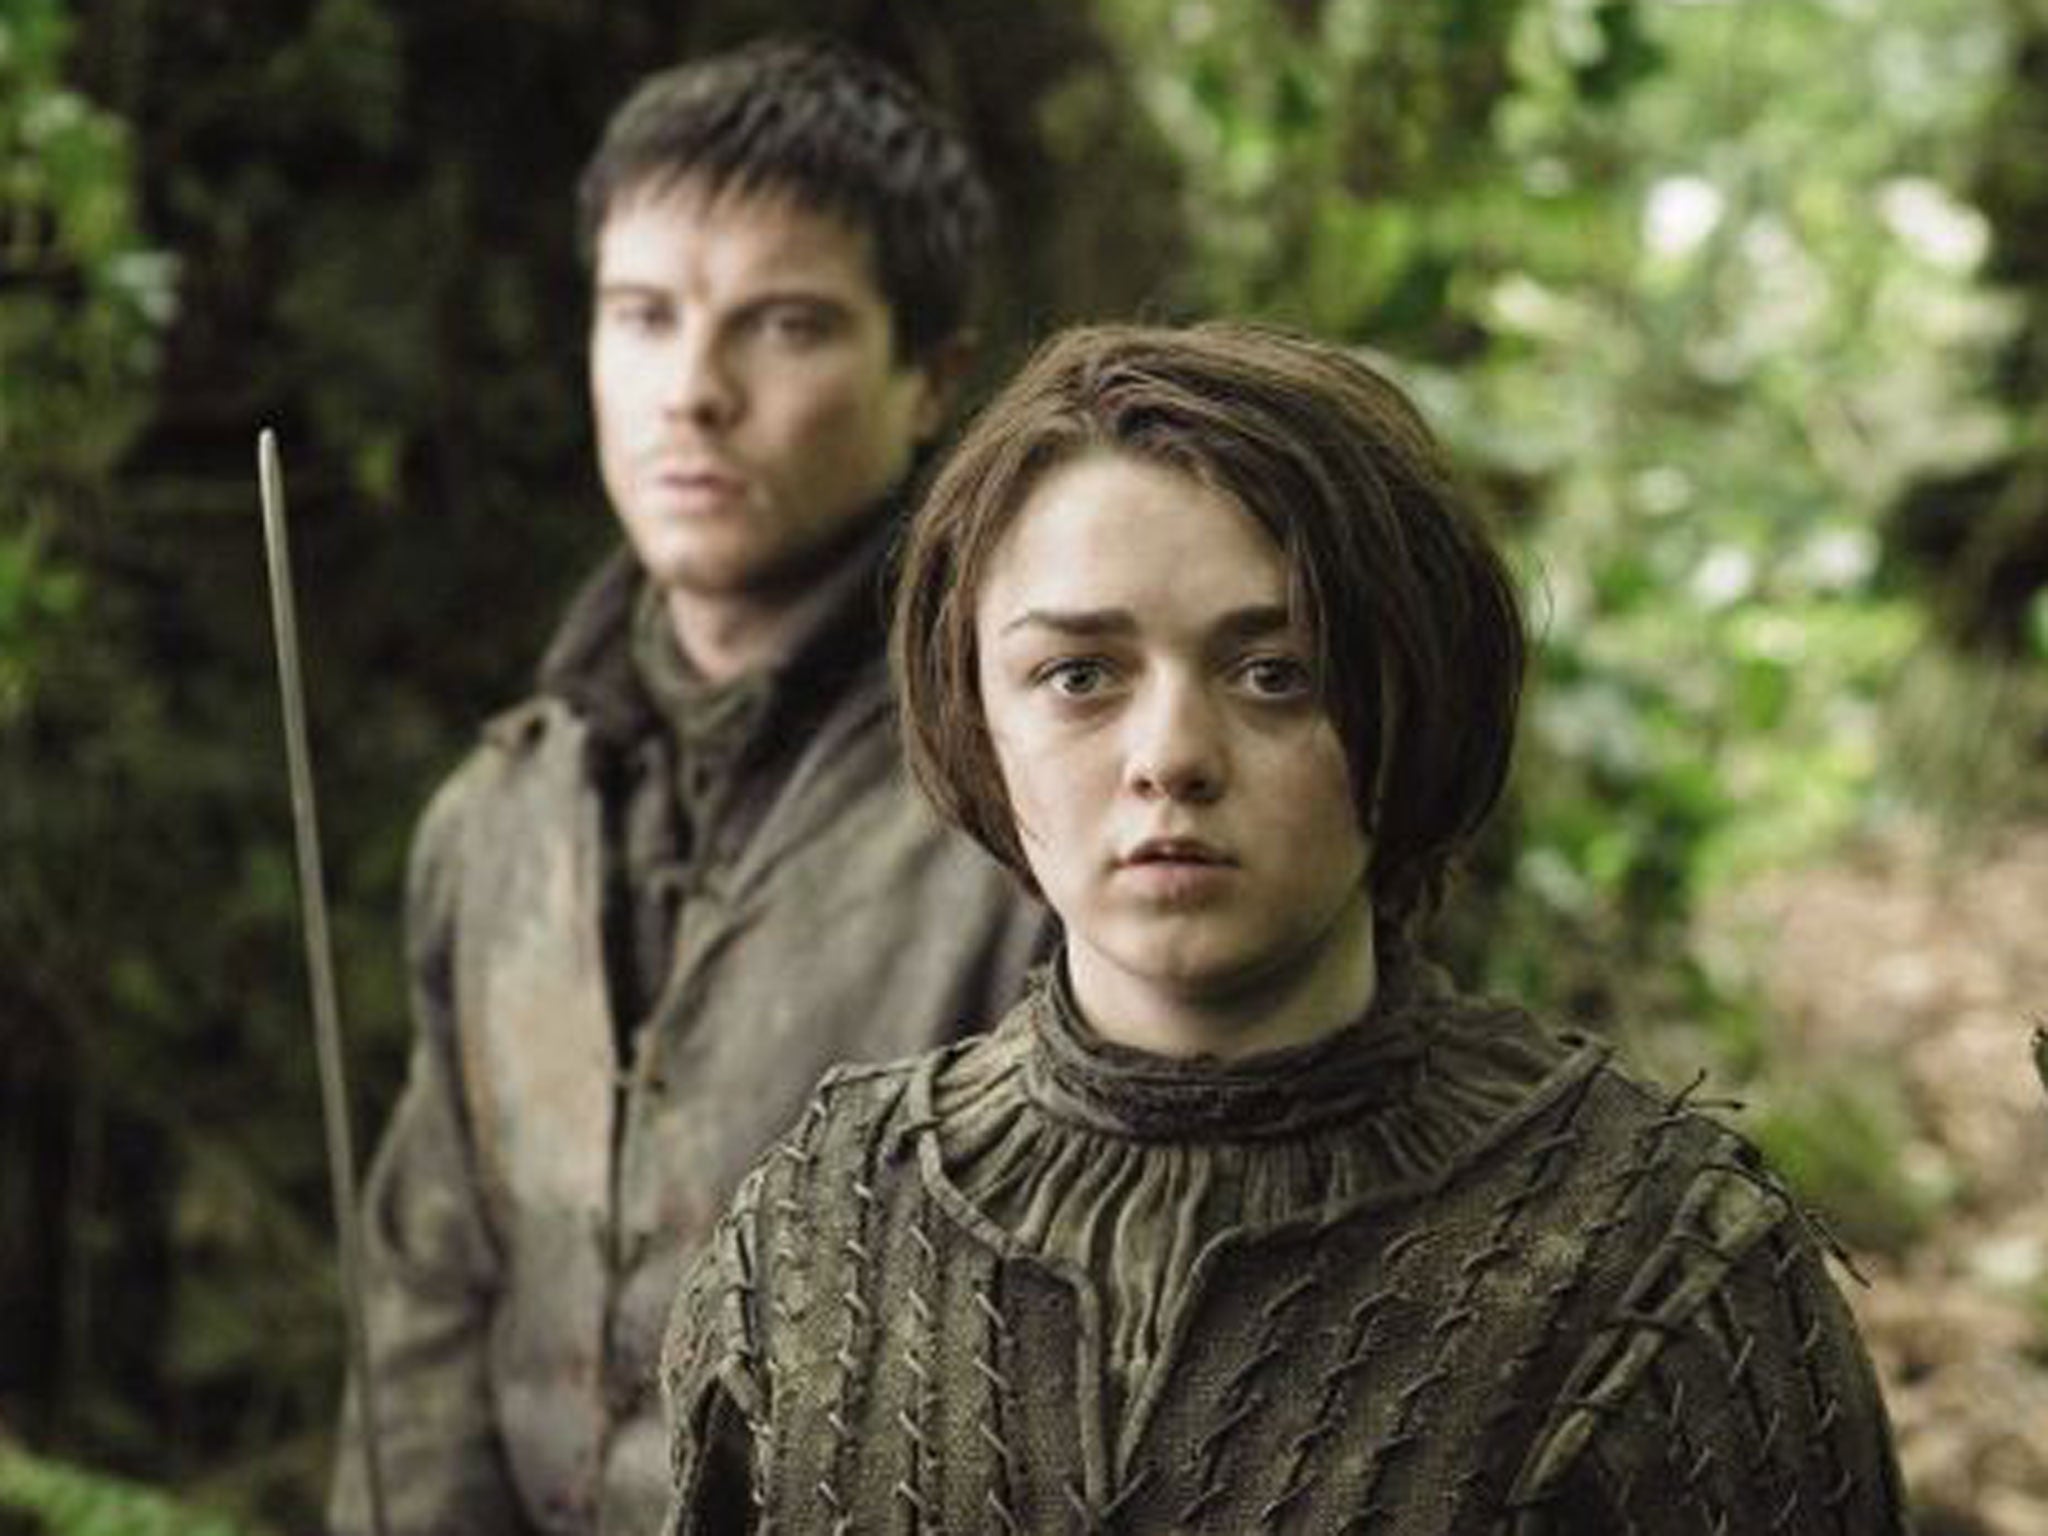 Joe Dempsie and Maisie Williams in a scene from Game of Thrones